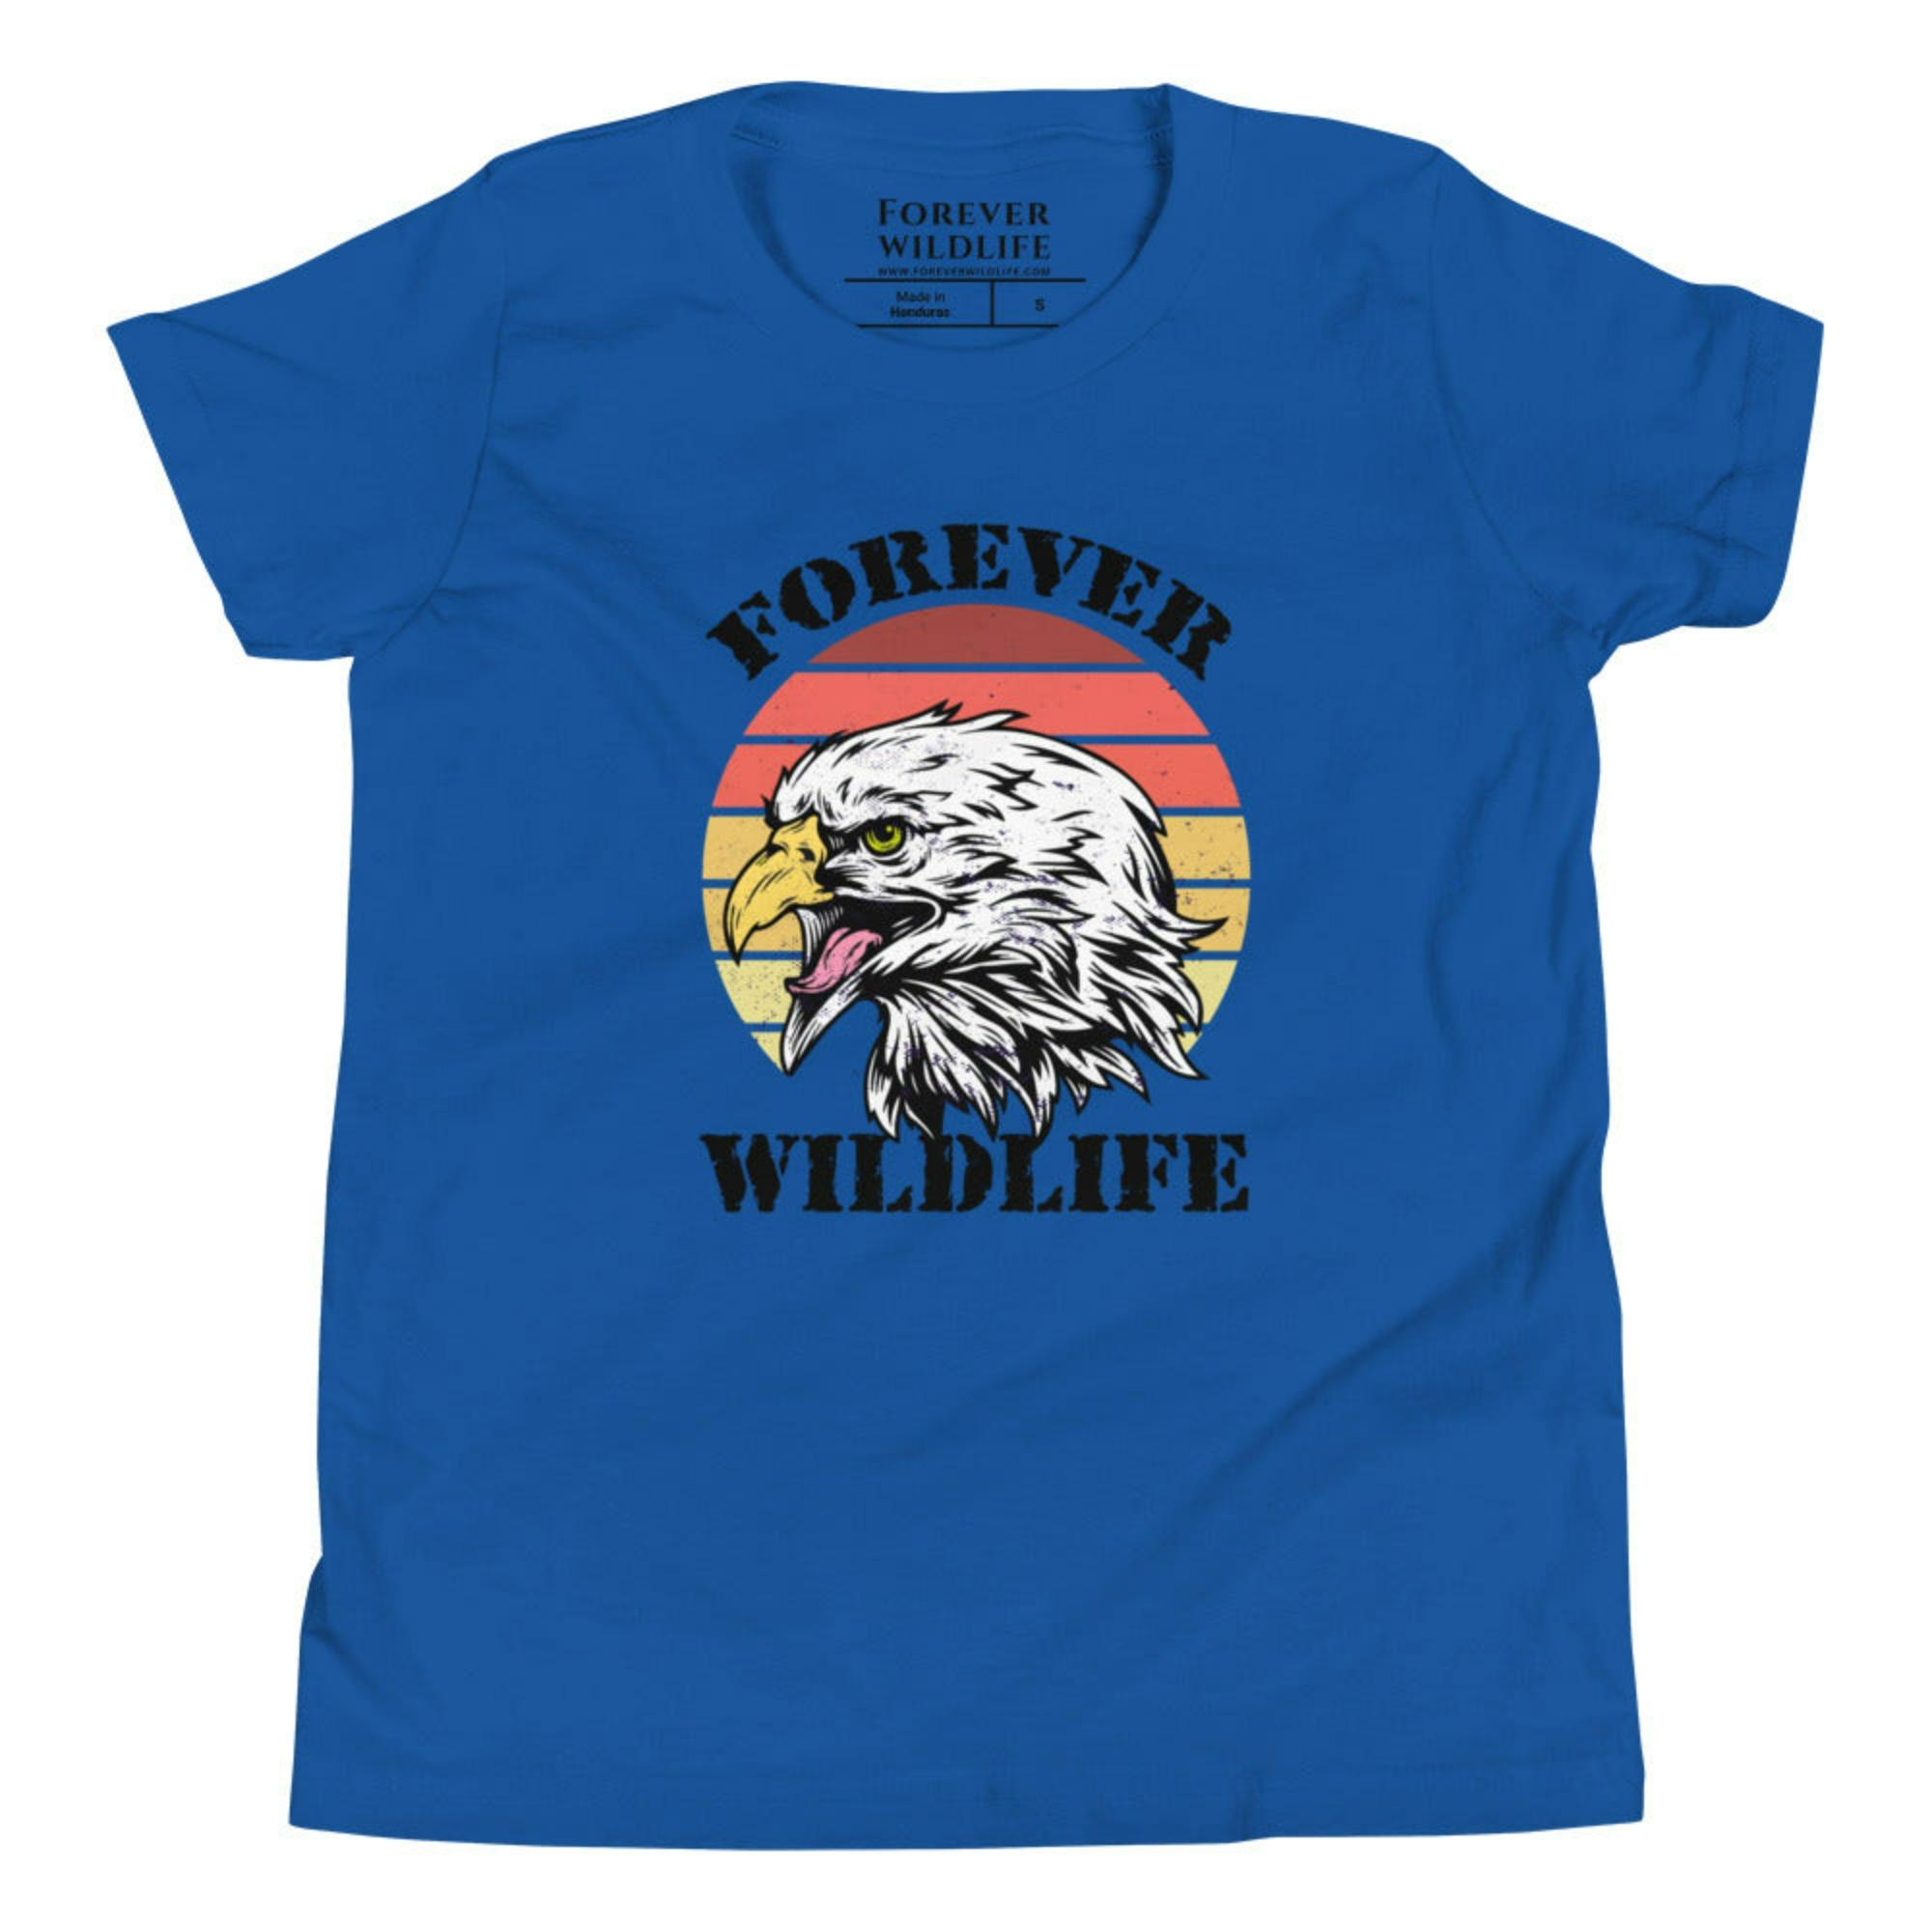 Royal Blue Youth T-Shirt with Eagle graphic as part of Wildlife T Shirts, Wildlife Clothing & Apparel by Forever Wildlife